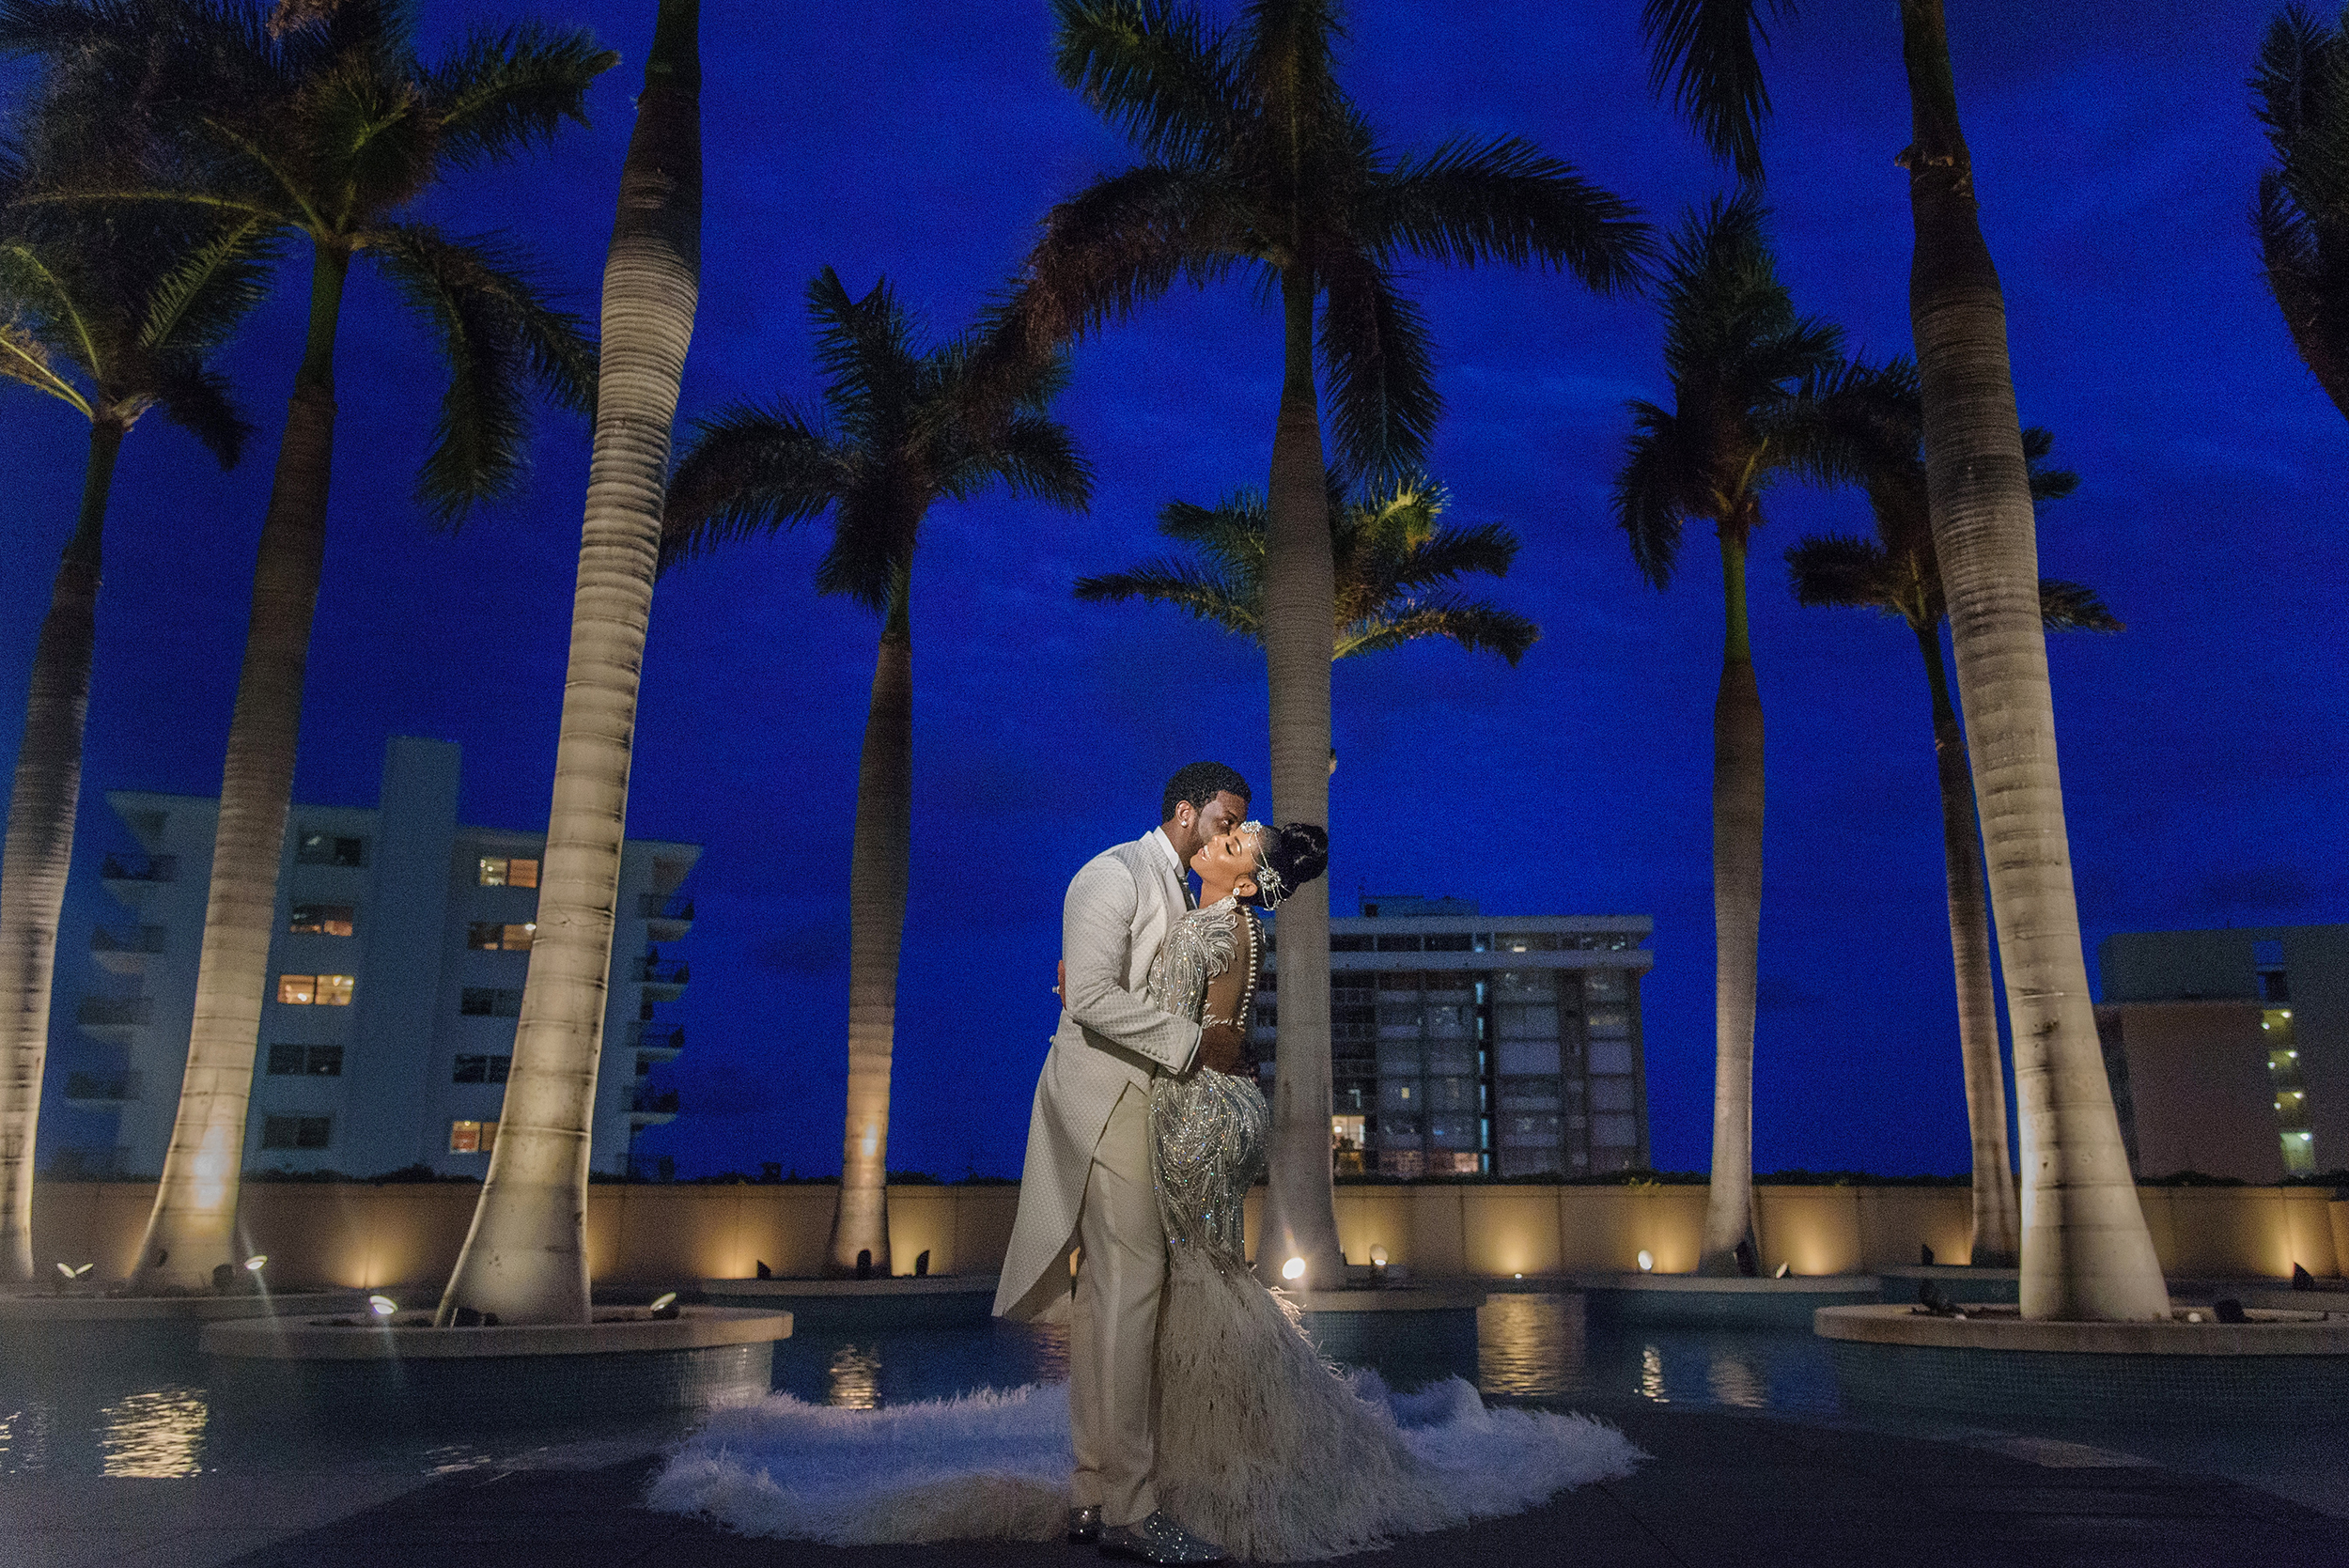 Gucci Mane and Keyshia Ka'oir kiss in front of palm trees at night in their wedding pictures.